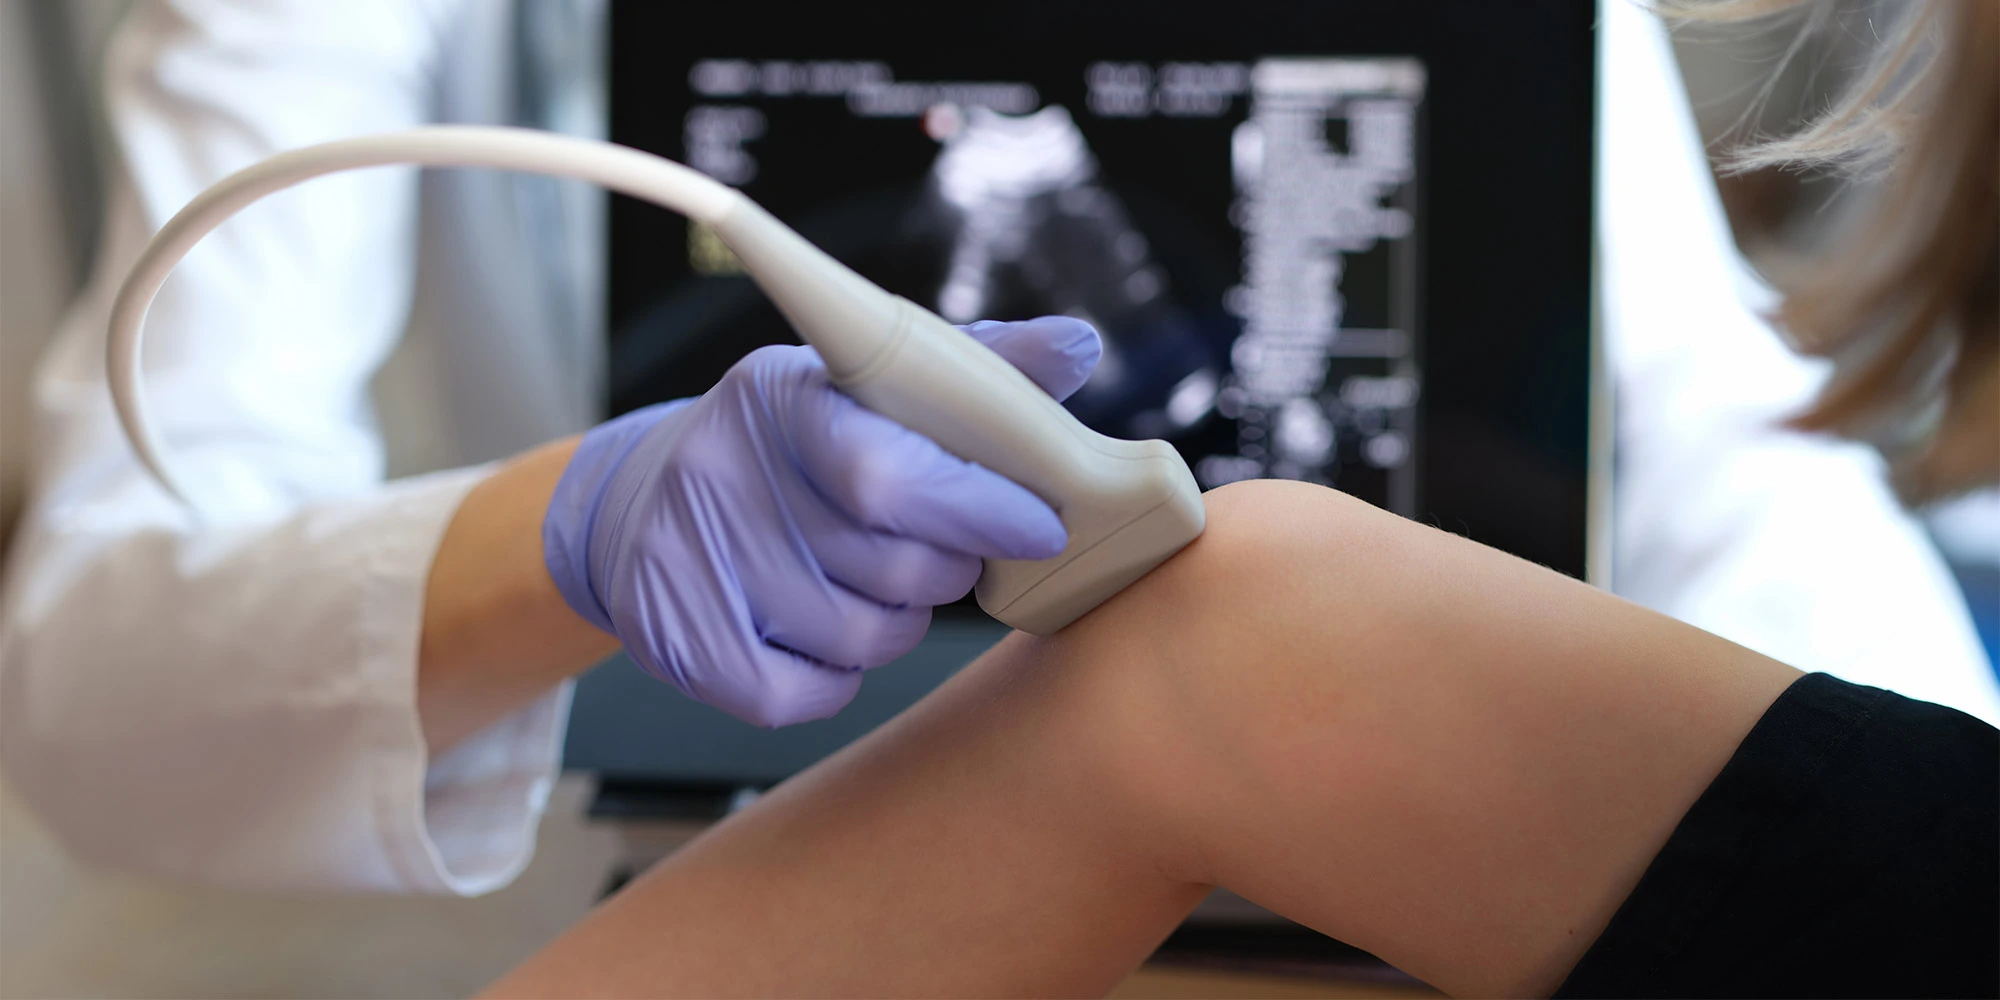 Ultrasound Technology: Significance, Applications and Advantages